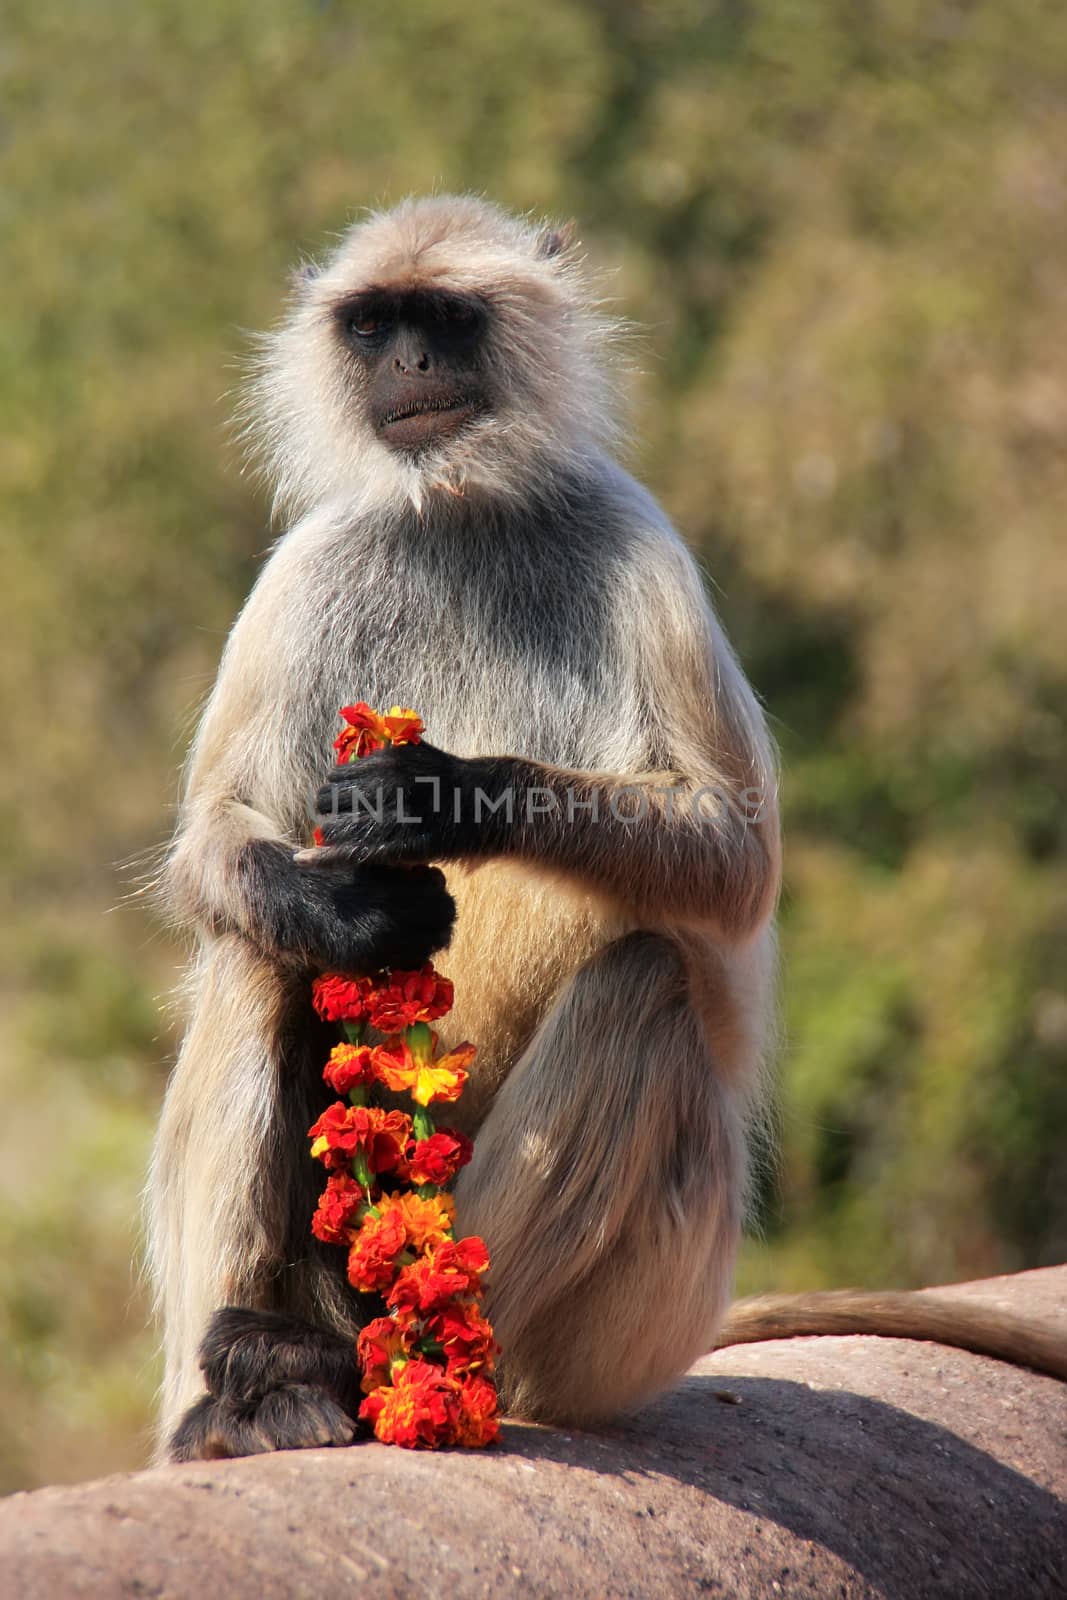 Gray langur (Semnopithecus dussumieri) sitting with flowers at Ranthambore Fort, Rajasthan, India